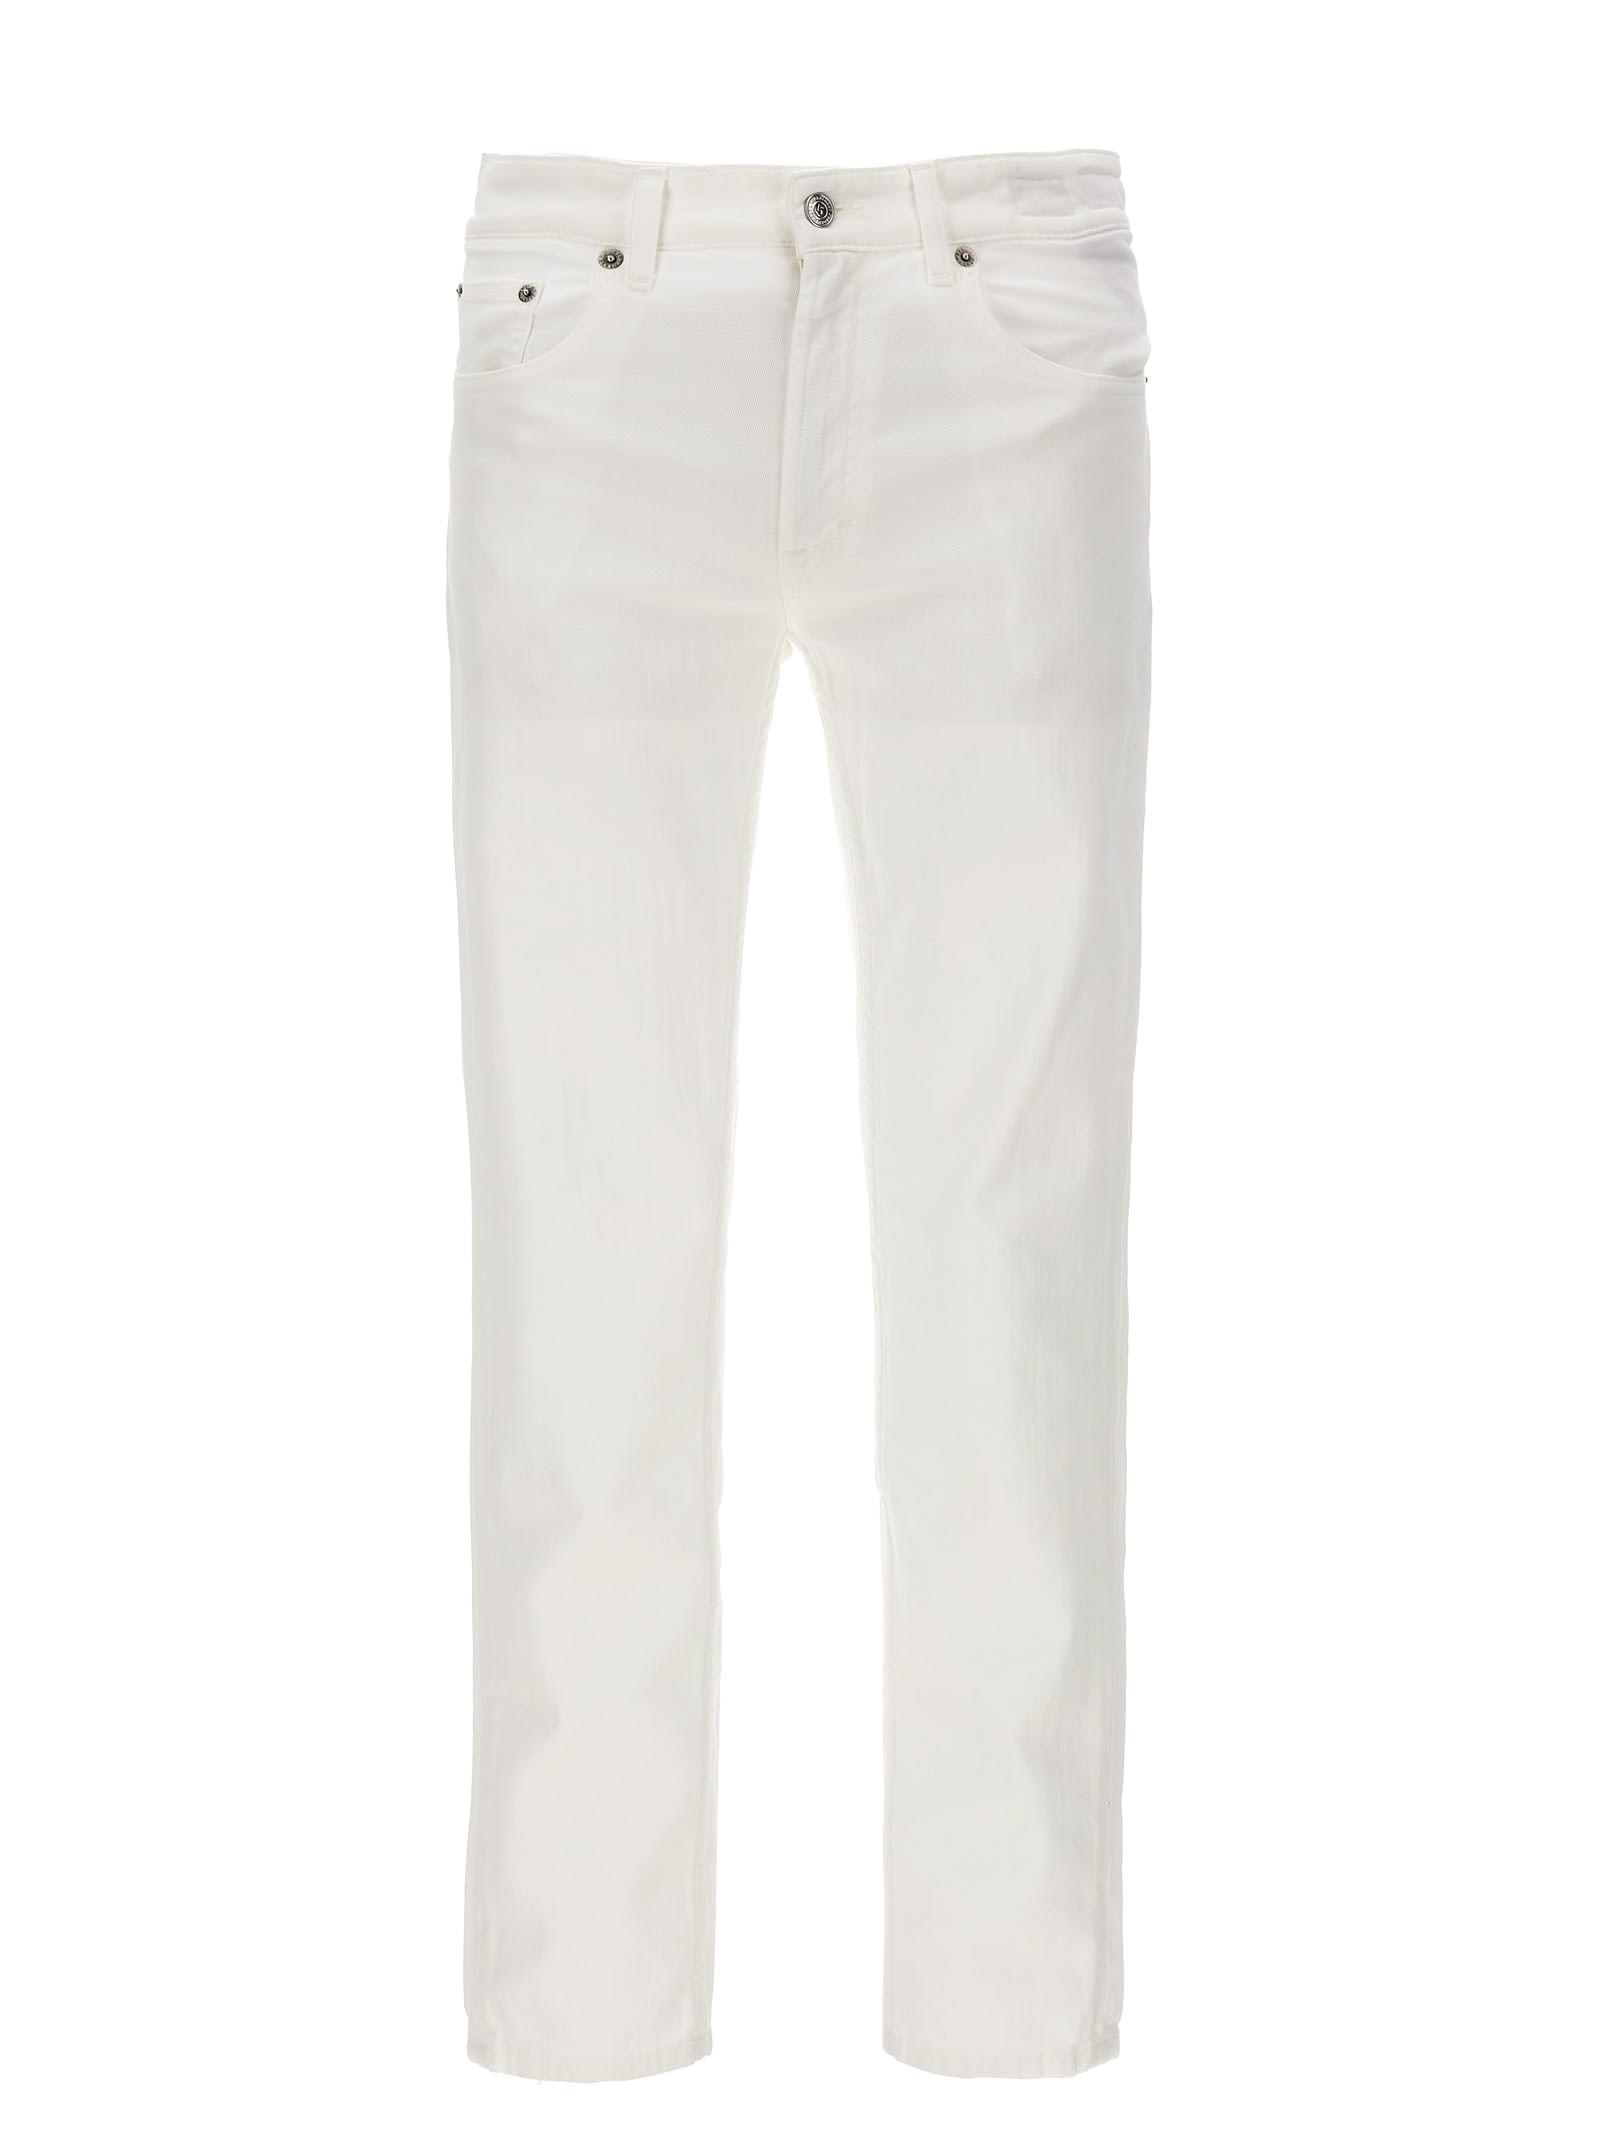 Department Five Skeith Jeans In White